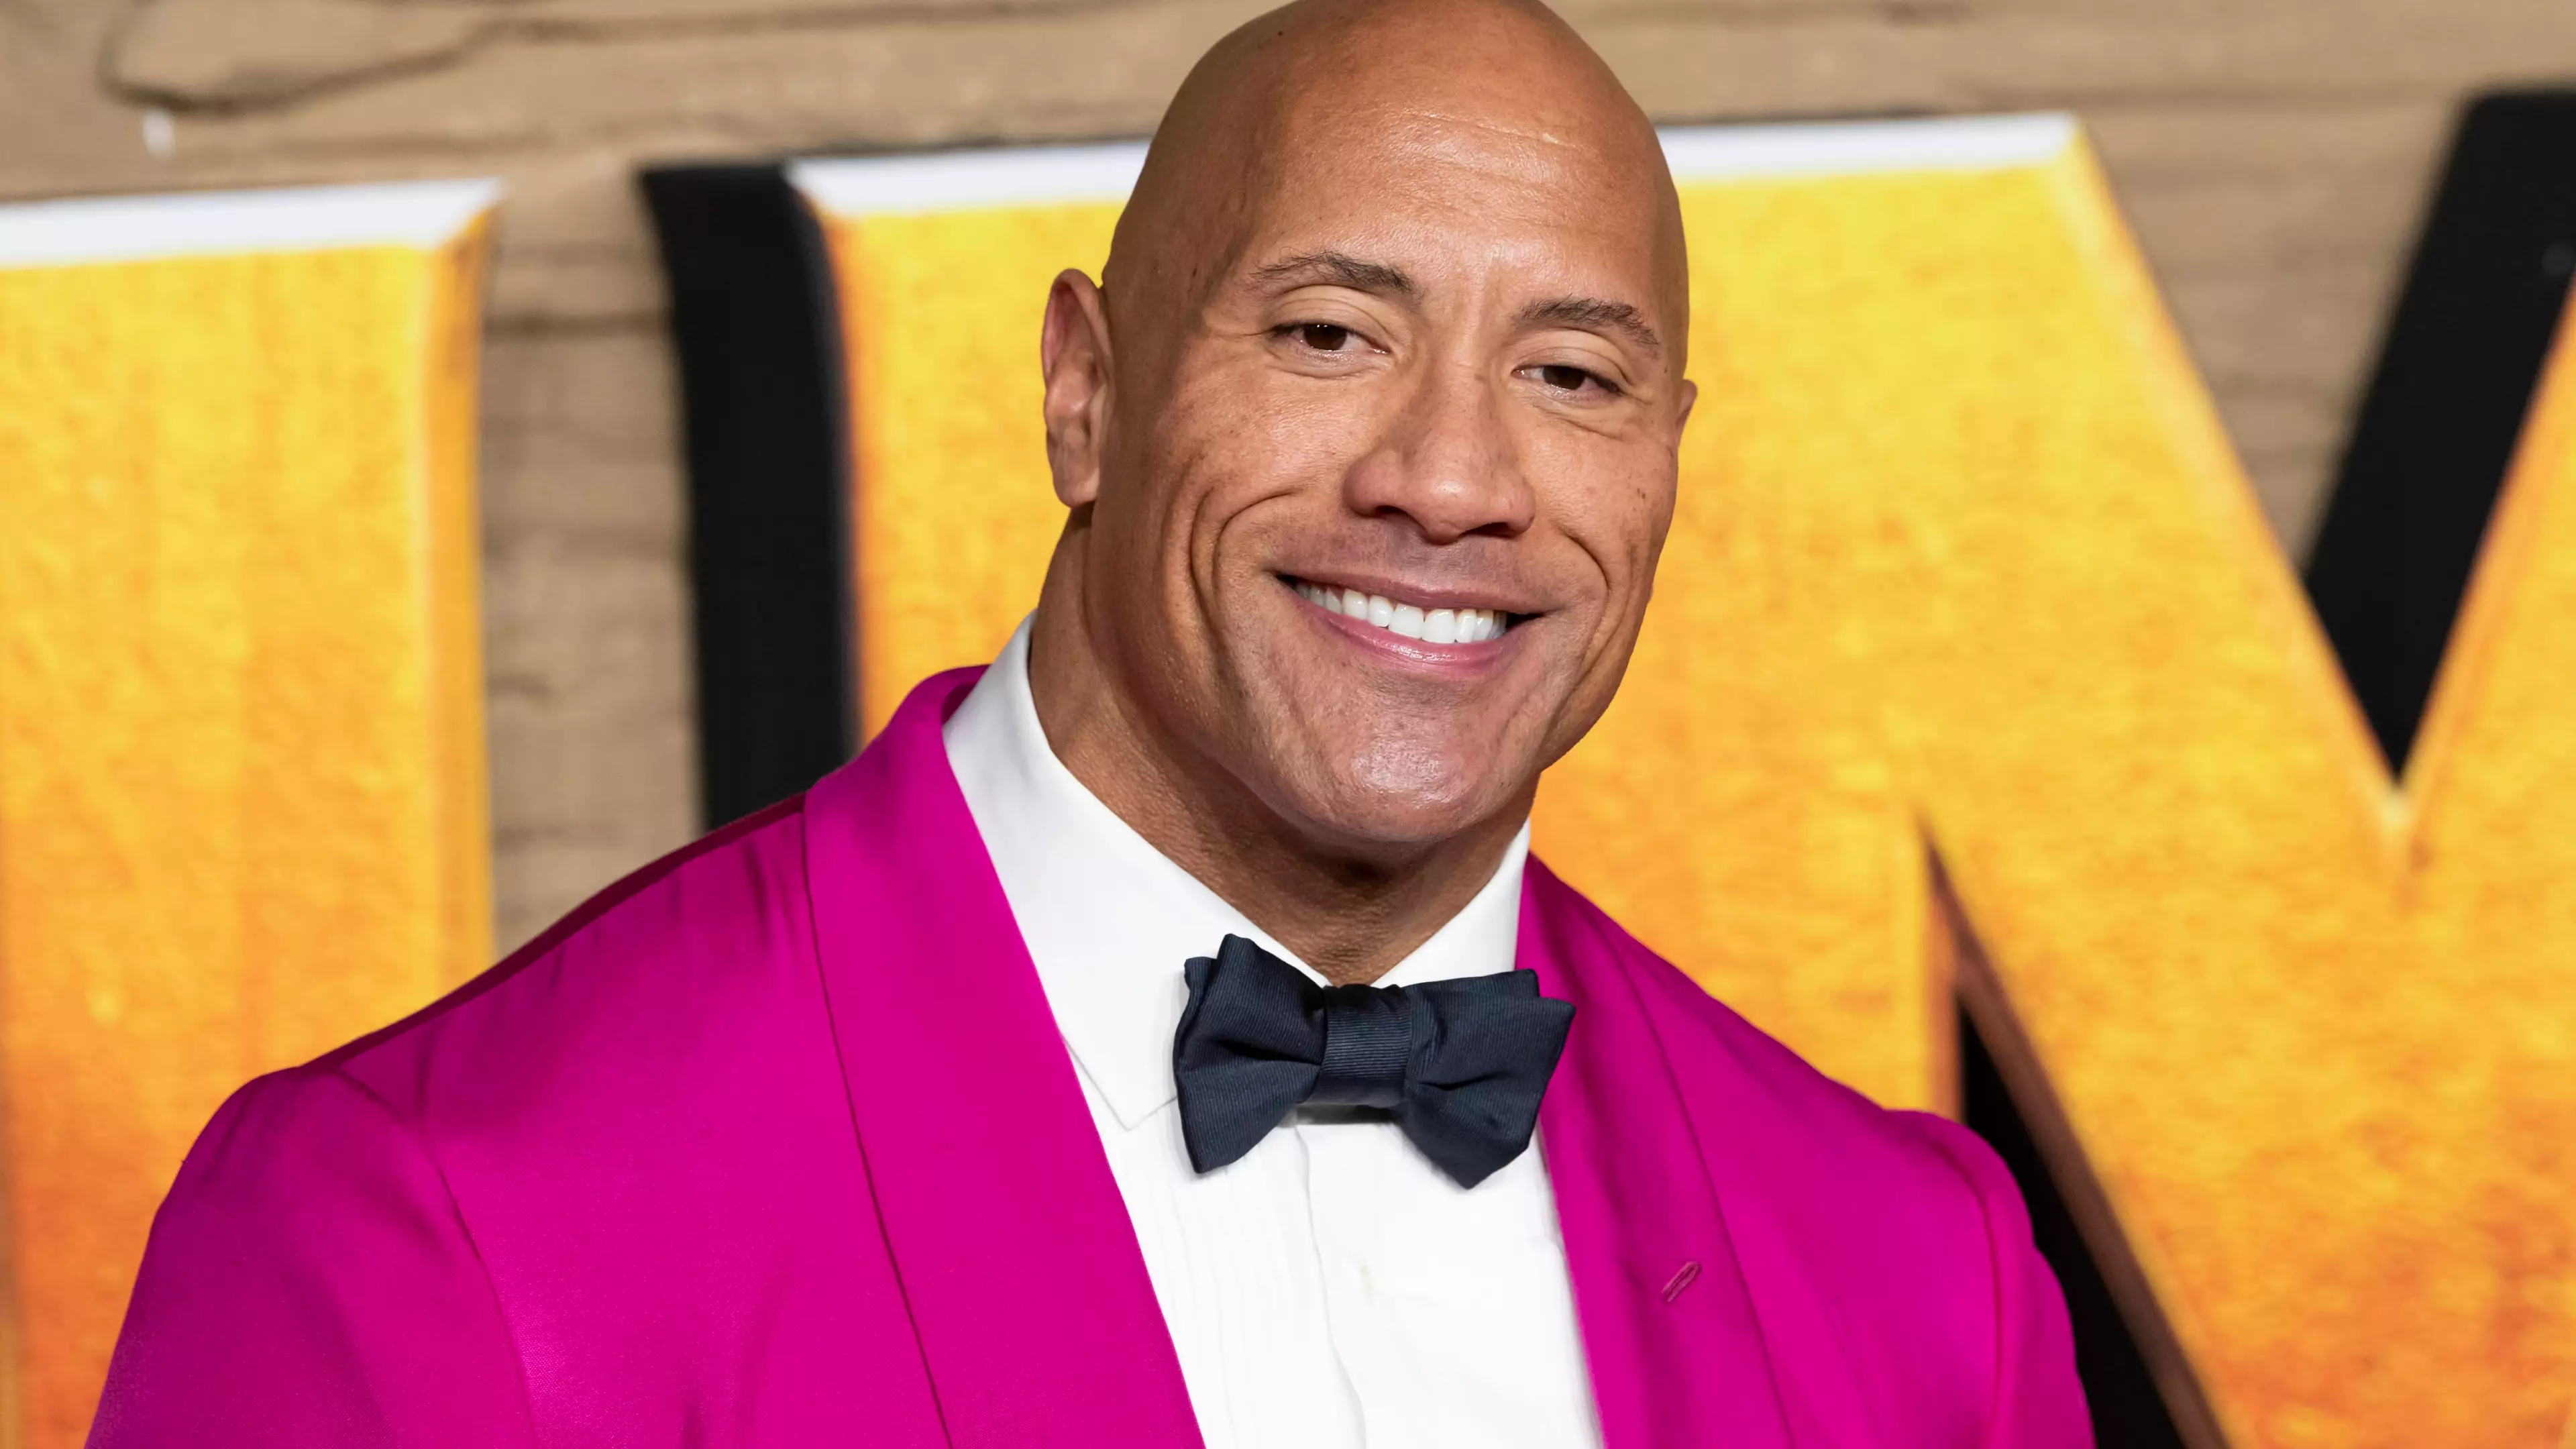 Dwayne Johnson Reveals He Used To Get Mistaken For A 'Little Girl' As A Kid